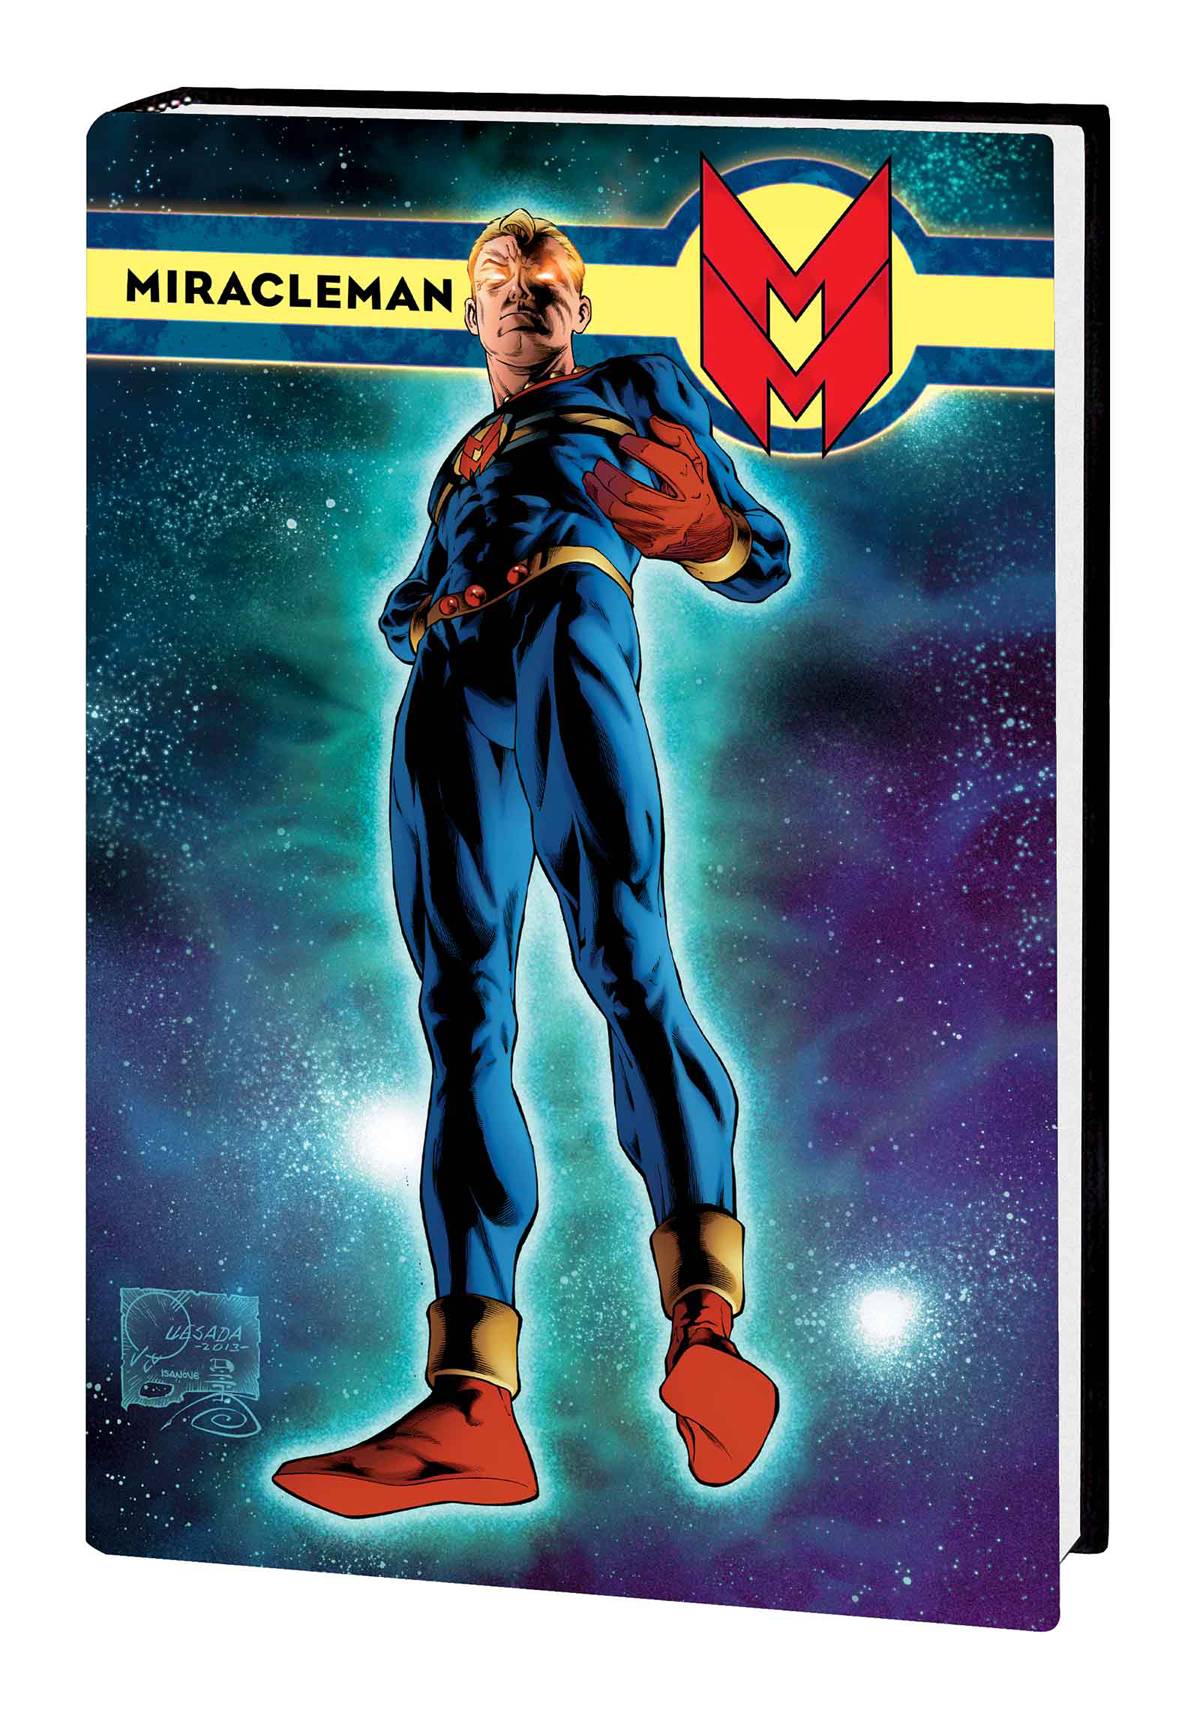 Miracleman Hardcover Book 1 Dream of Flying Dm Quesada Variant Edition